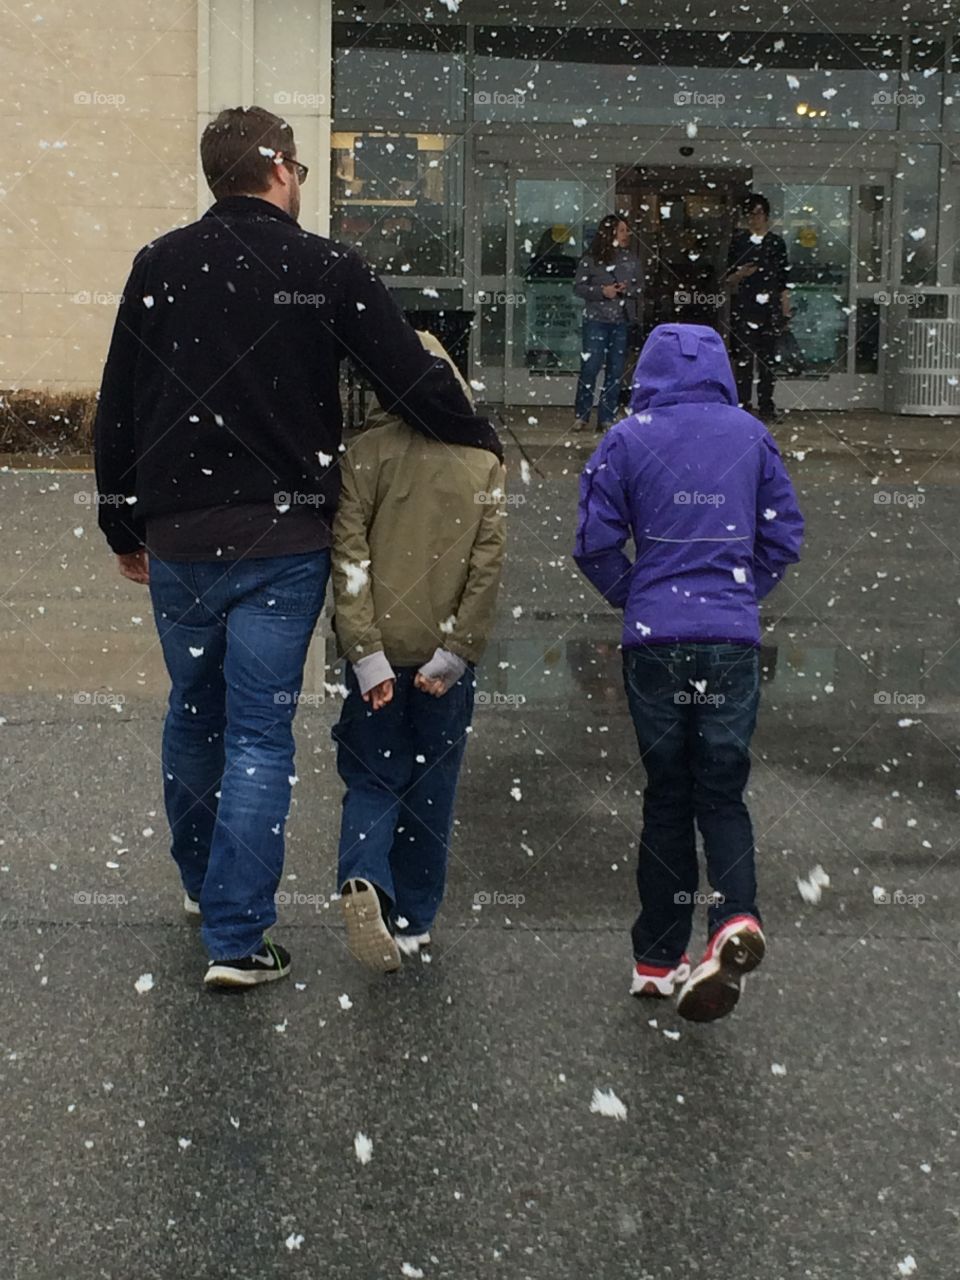 A Snowy Shopping Day